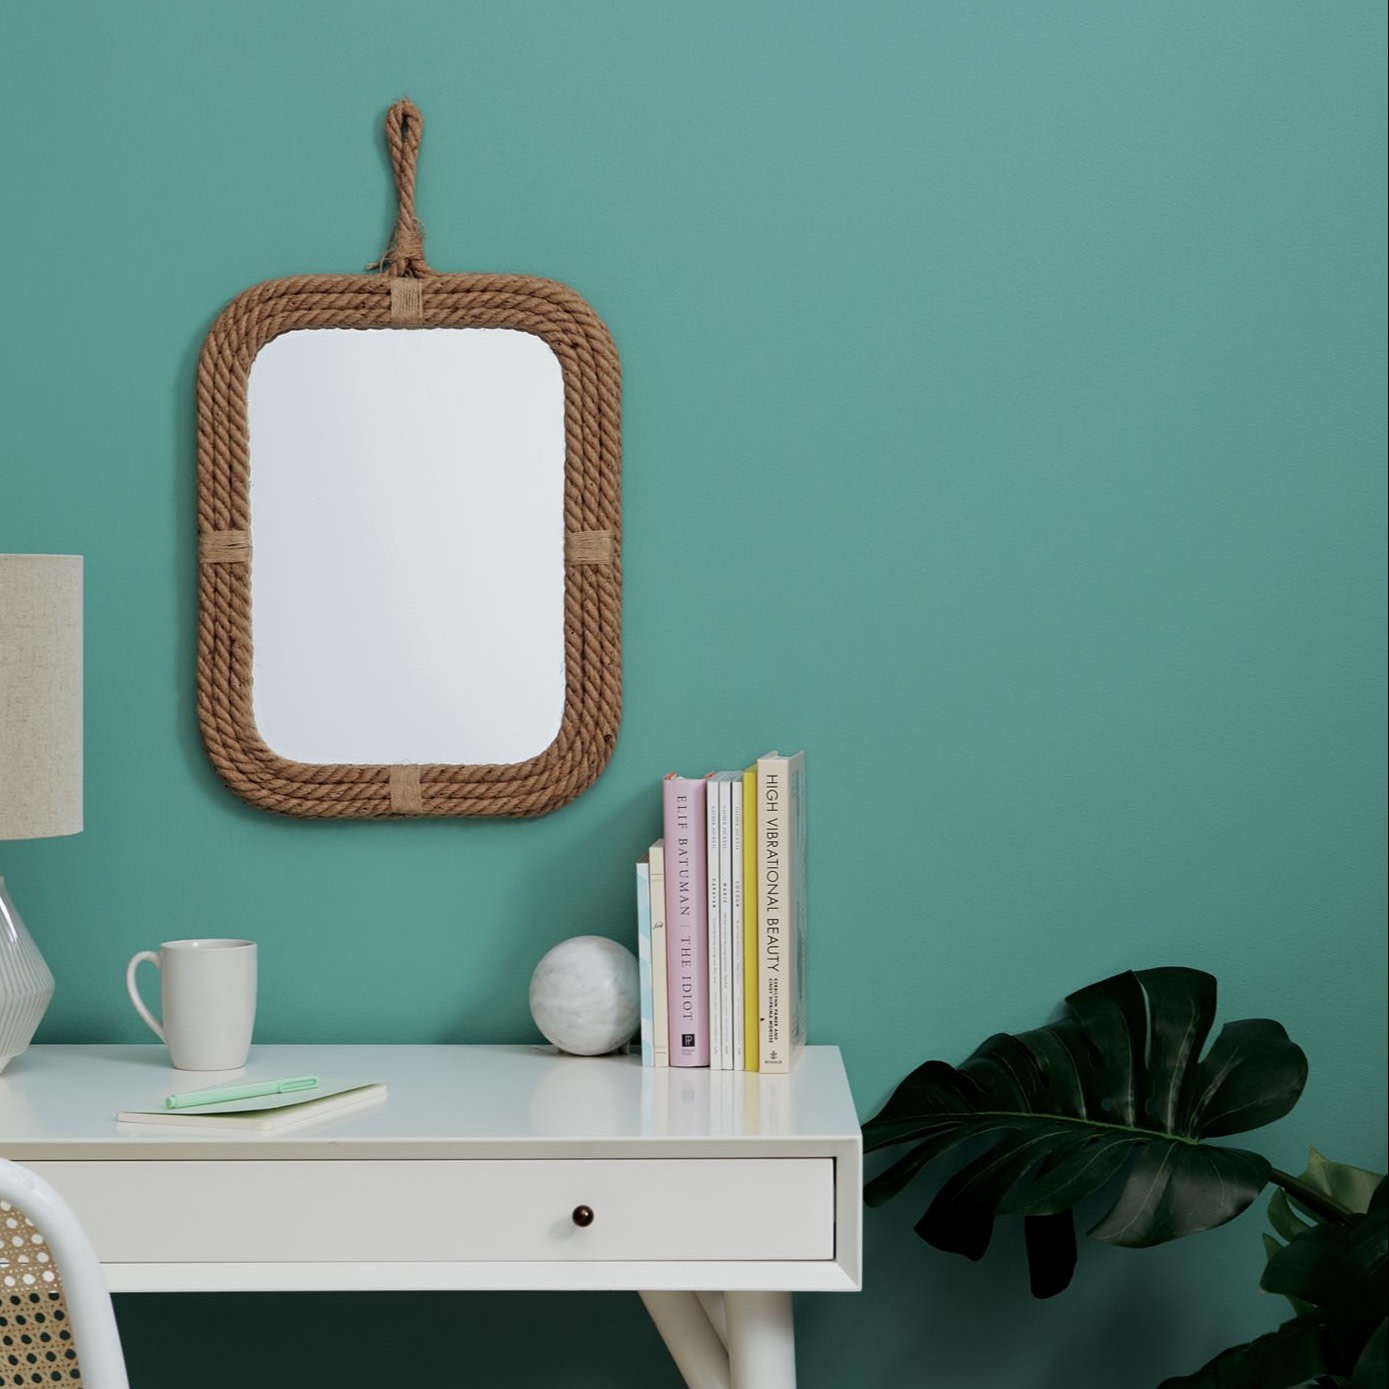 vanity mirror, desk, and plant, teal wall paint color Clare paint vacay